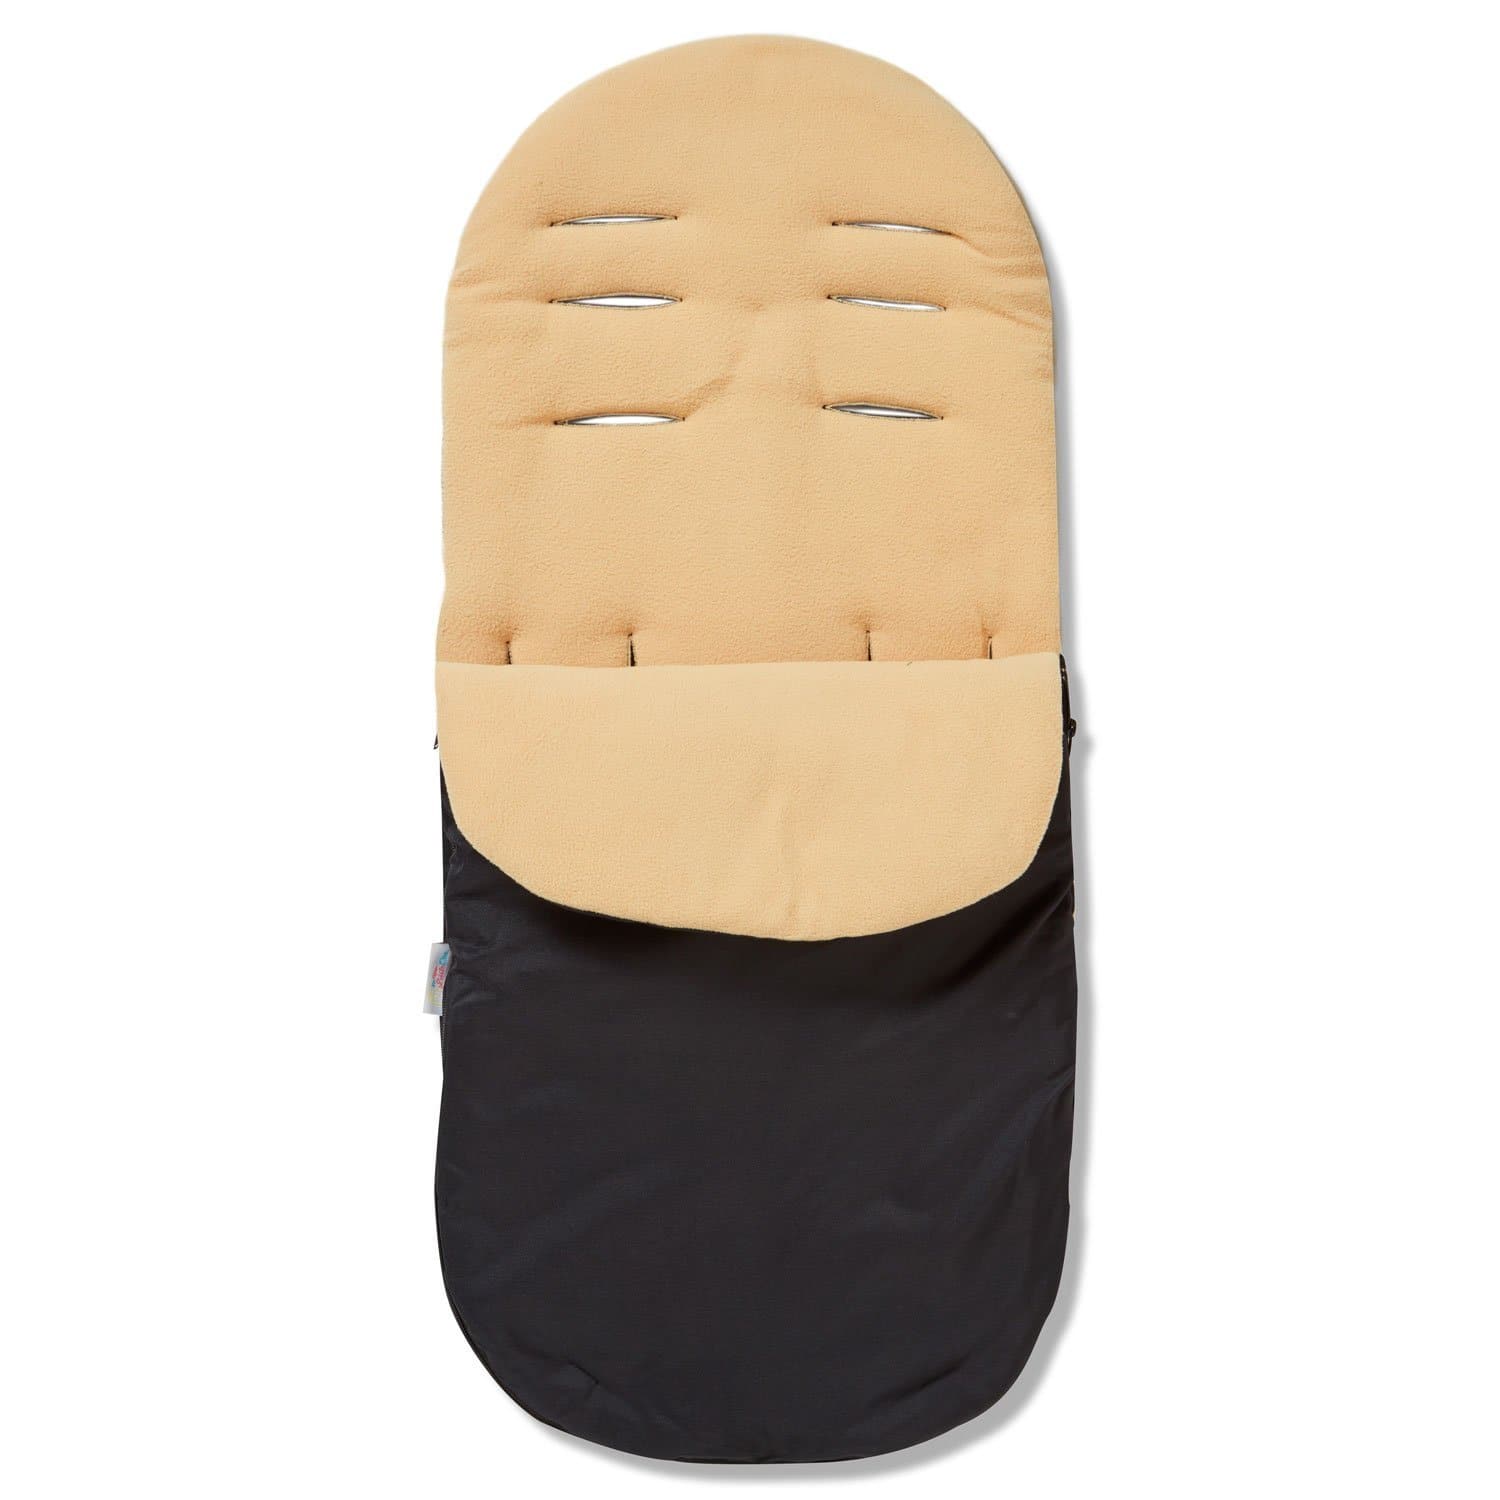 Footmuff / Cosy Toes Compatible with Brio - Sand / Fits All Models | For Your Little One